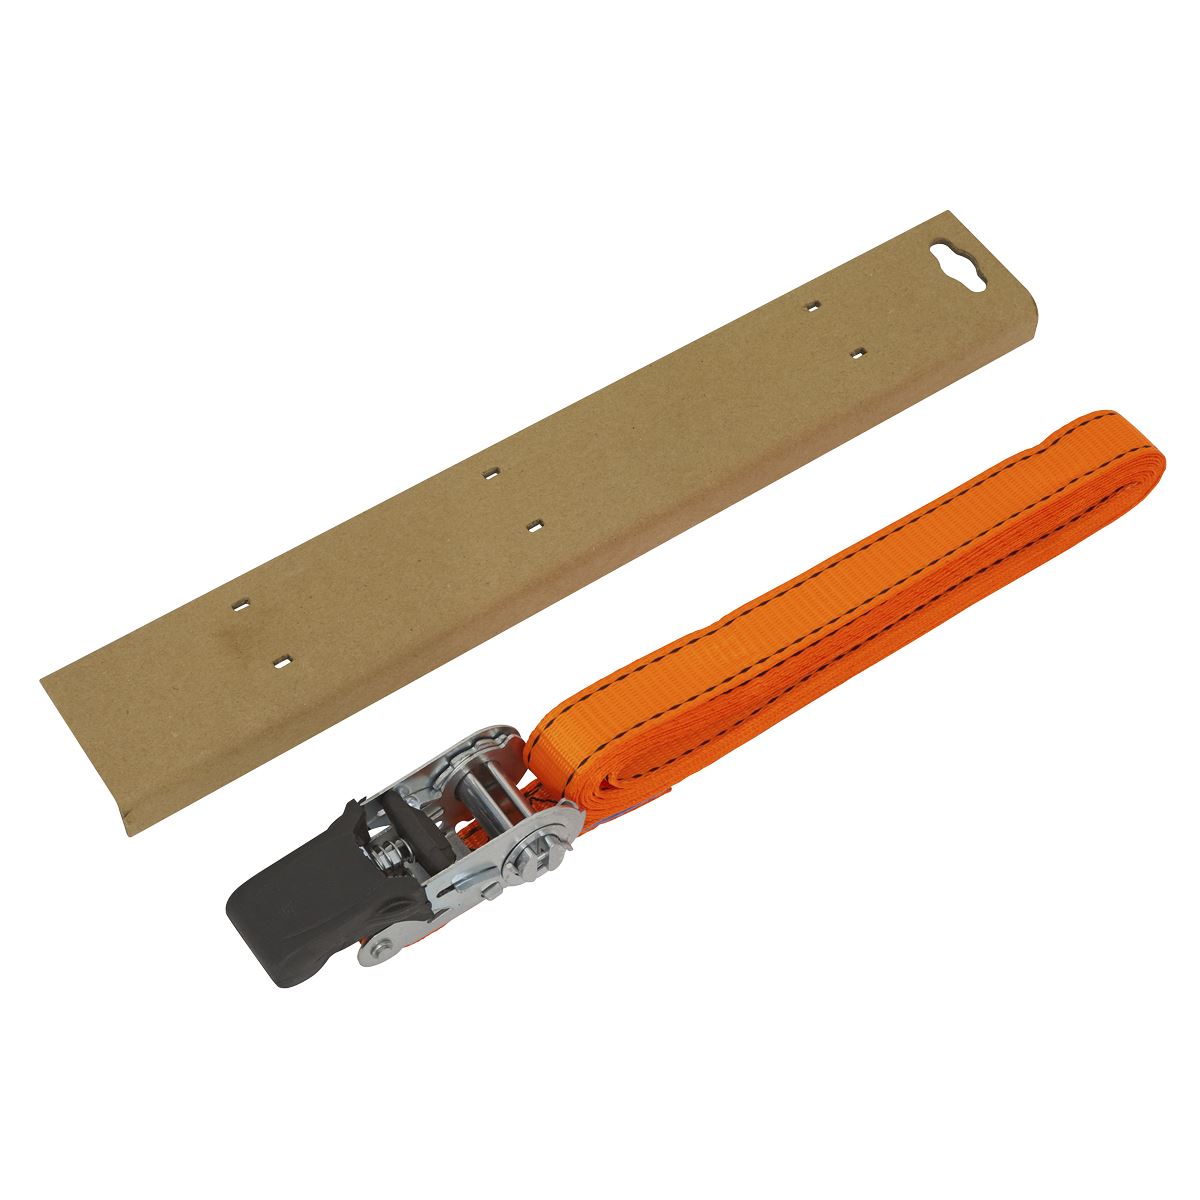 Sealey Ratchet Strap 25mm x 5m Polyester Webbing with Corner Protector 600kg Breaking Strength